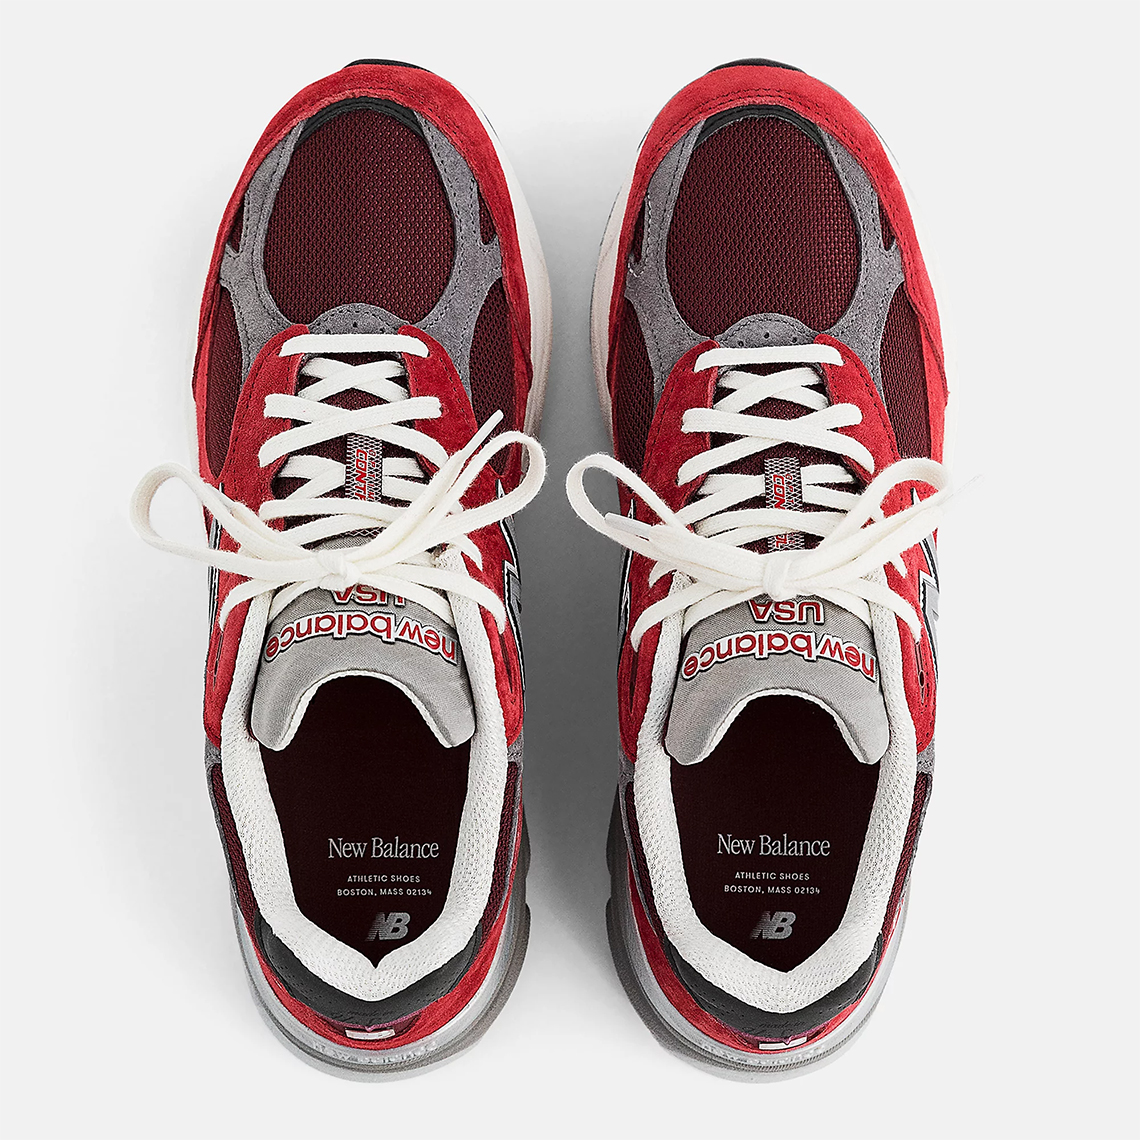 New Balance 990v3 Nb Scarlet Marblehead M990tf3 Release Date 1